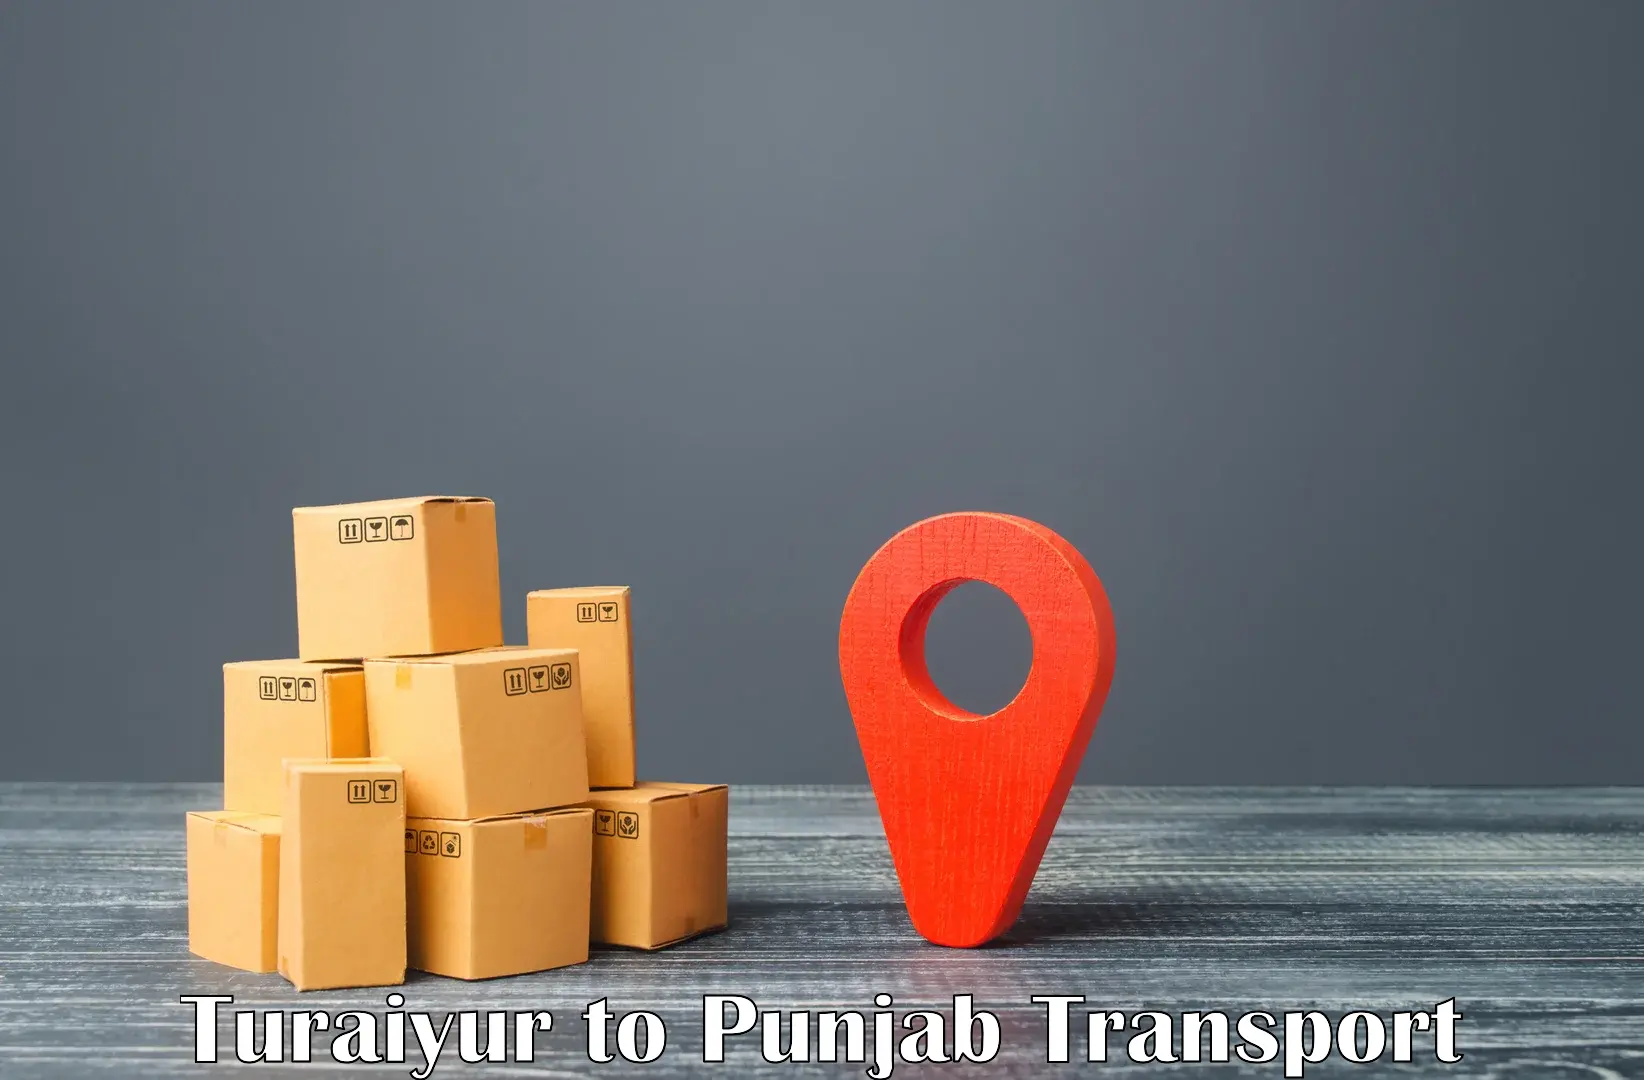 Nearby transport service Turaiyur to Mohali